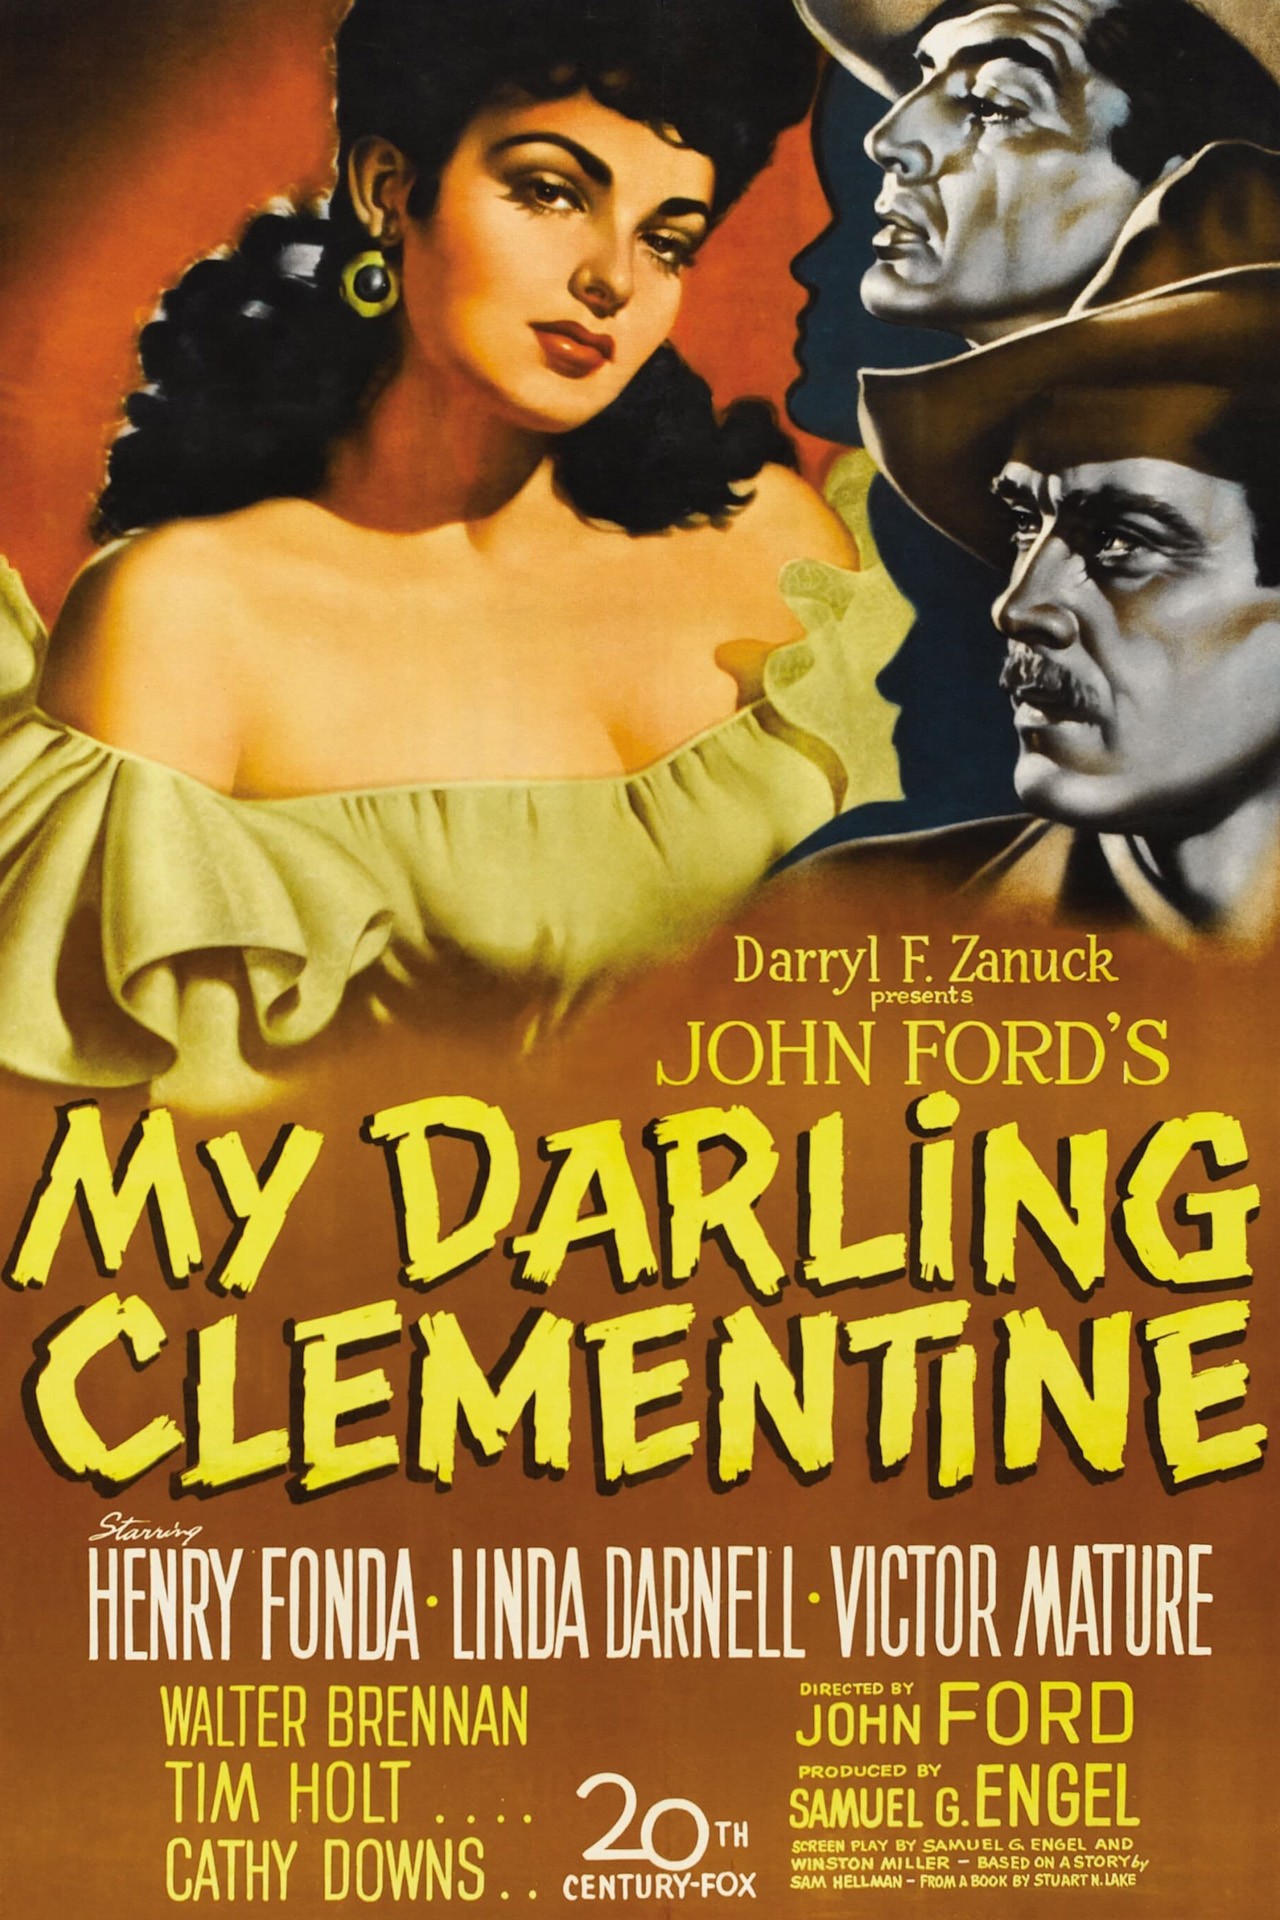 It's a Beautiful Day in the Neighborhood – Darling Clementine